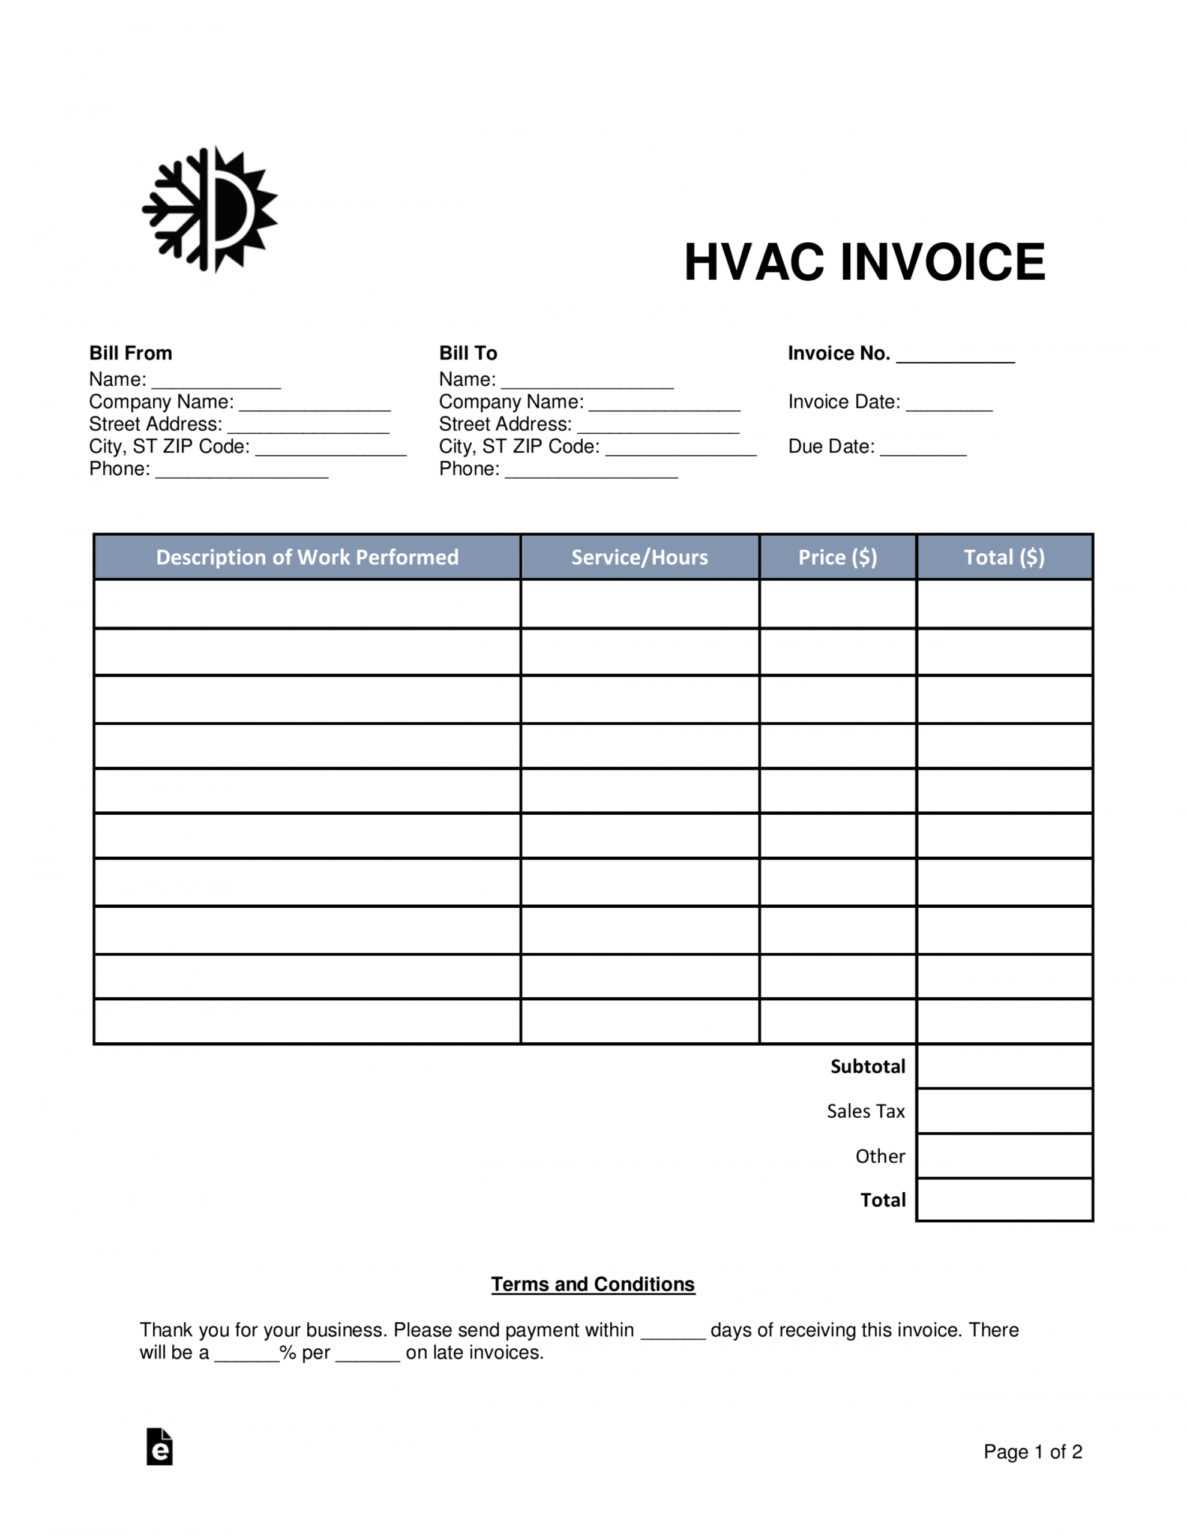 Heating And Cooling Invoice Template